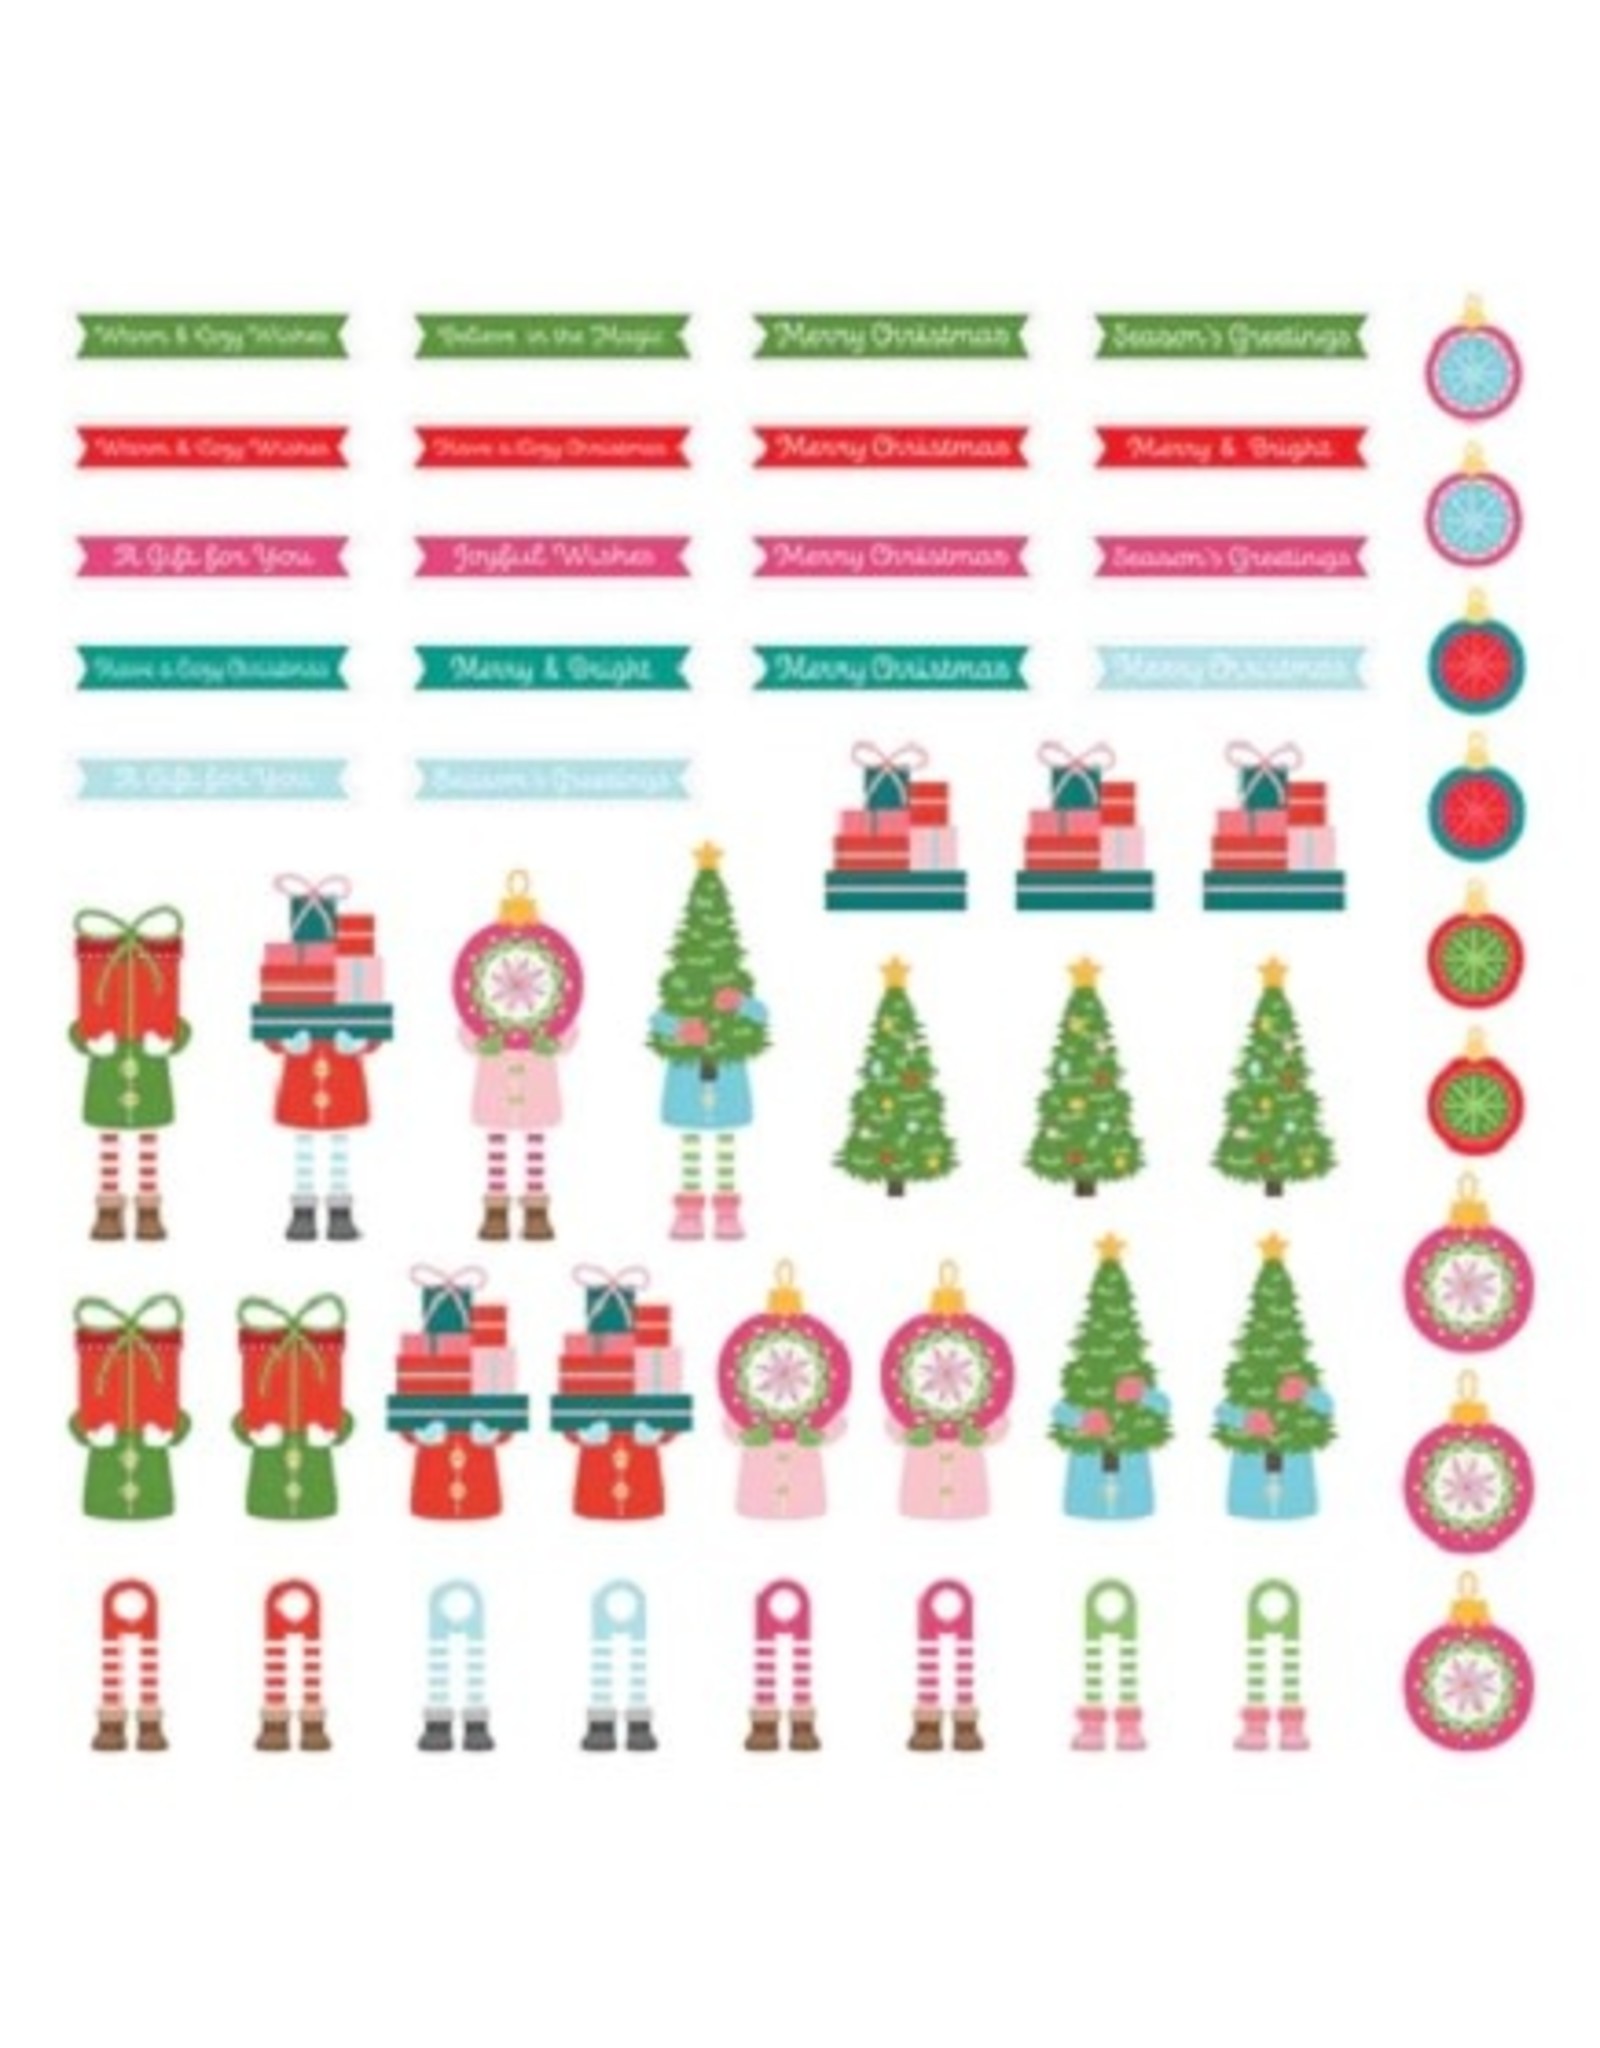 Spellbinders Christmas Delivery Printed Die Cuts from the Oh What Fun Collection